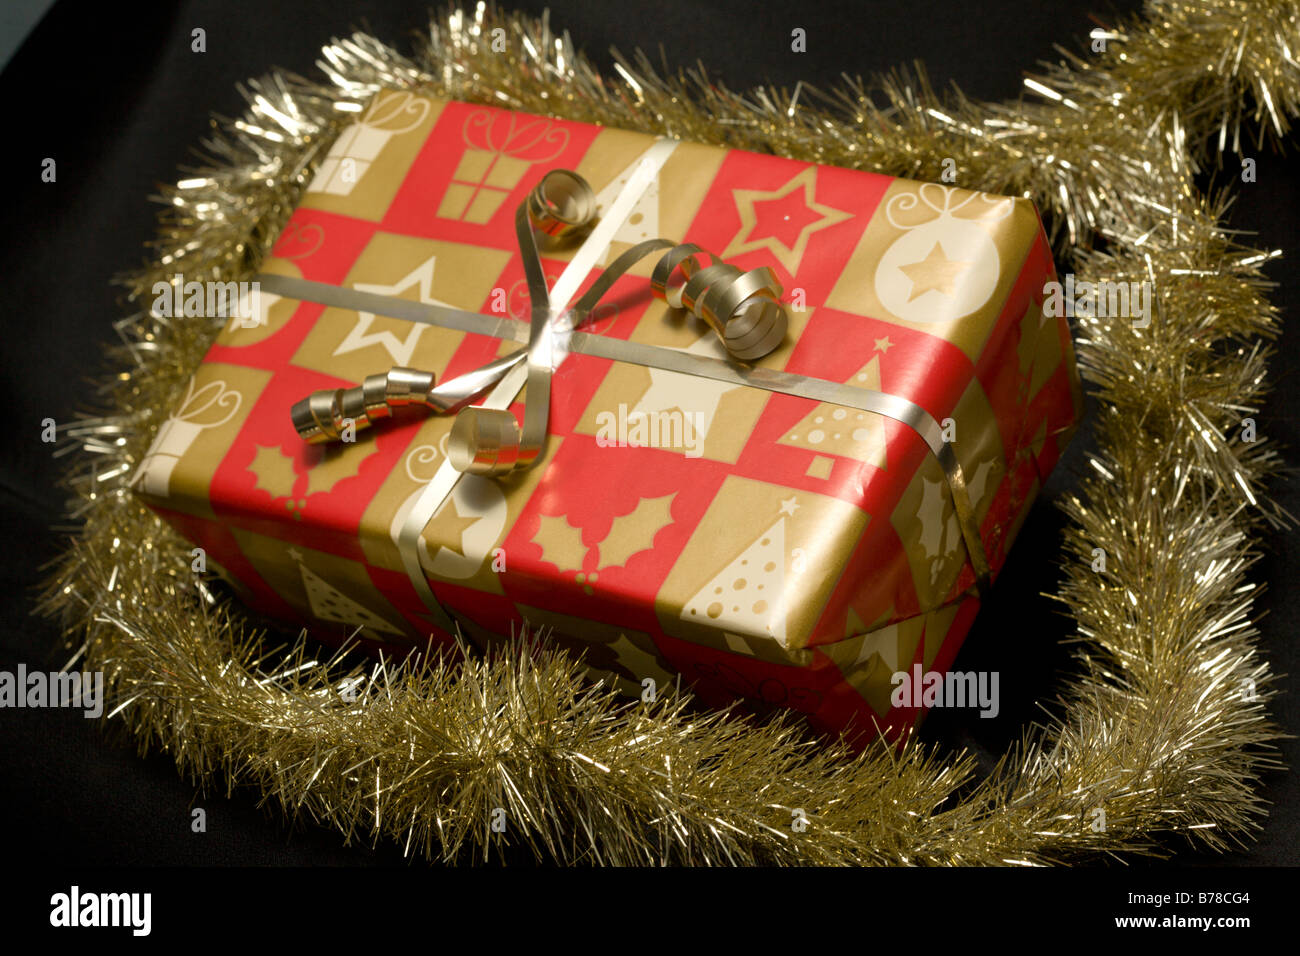 Christmas present in gold and red paper wrapped with a gold ribbon Stock Photo